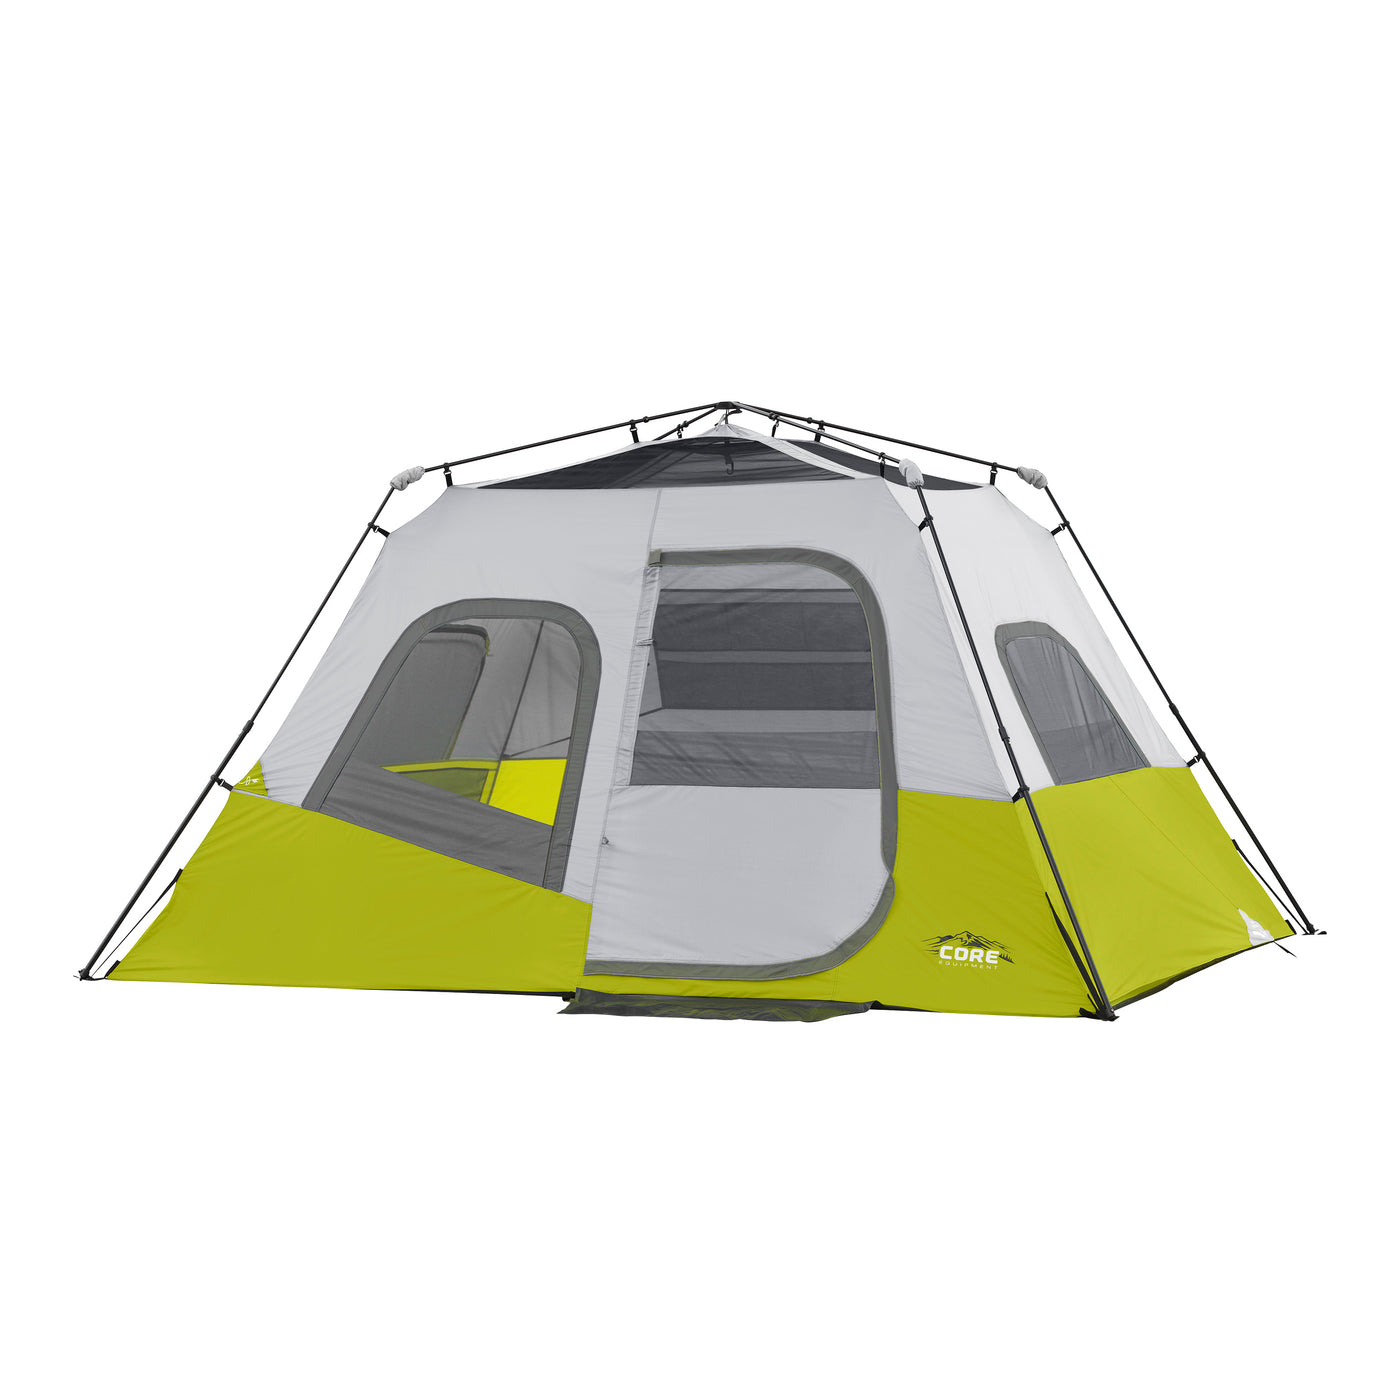 Camping 12 Person Instant Cabin Tent with Integrated LED Lights 3